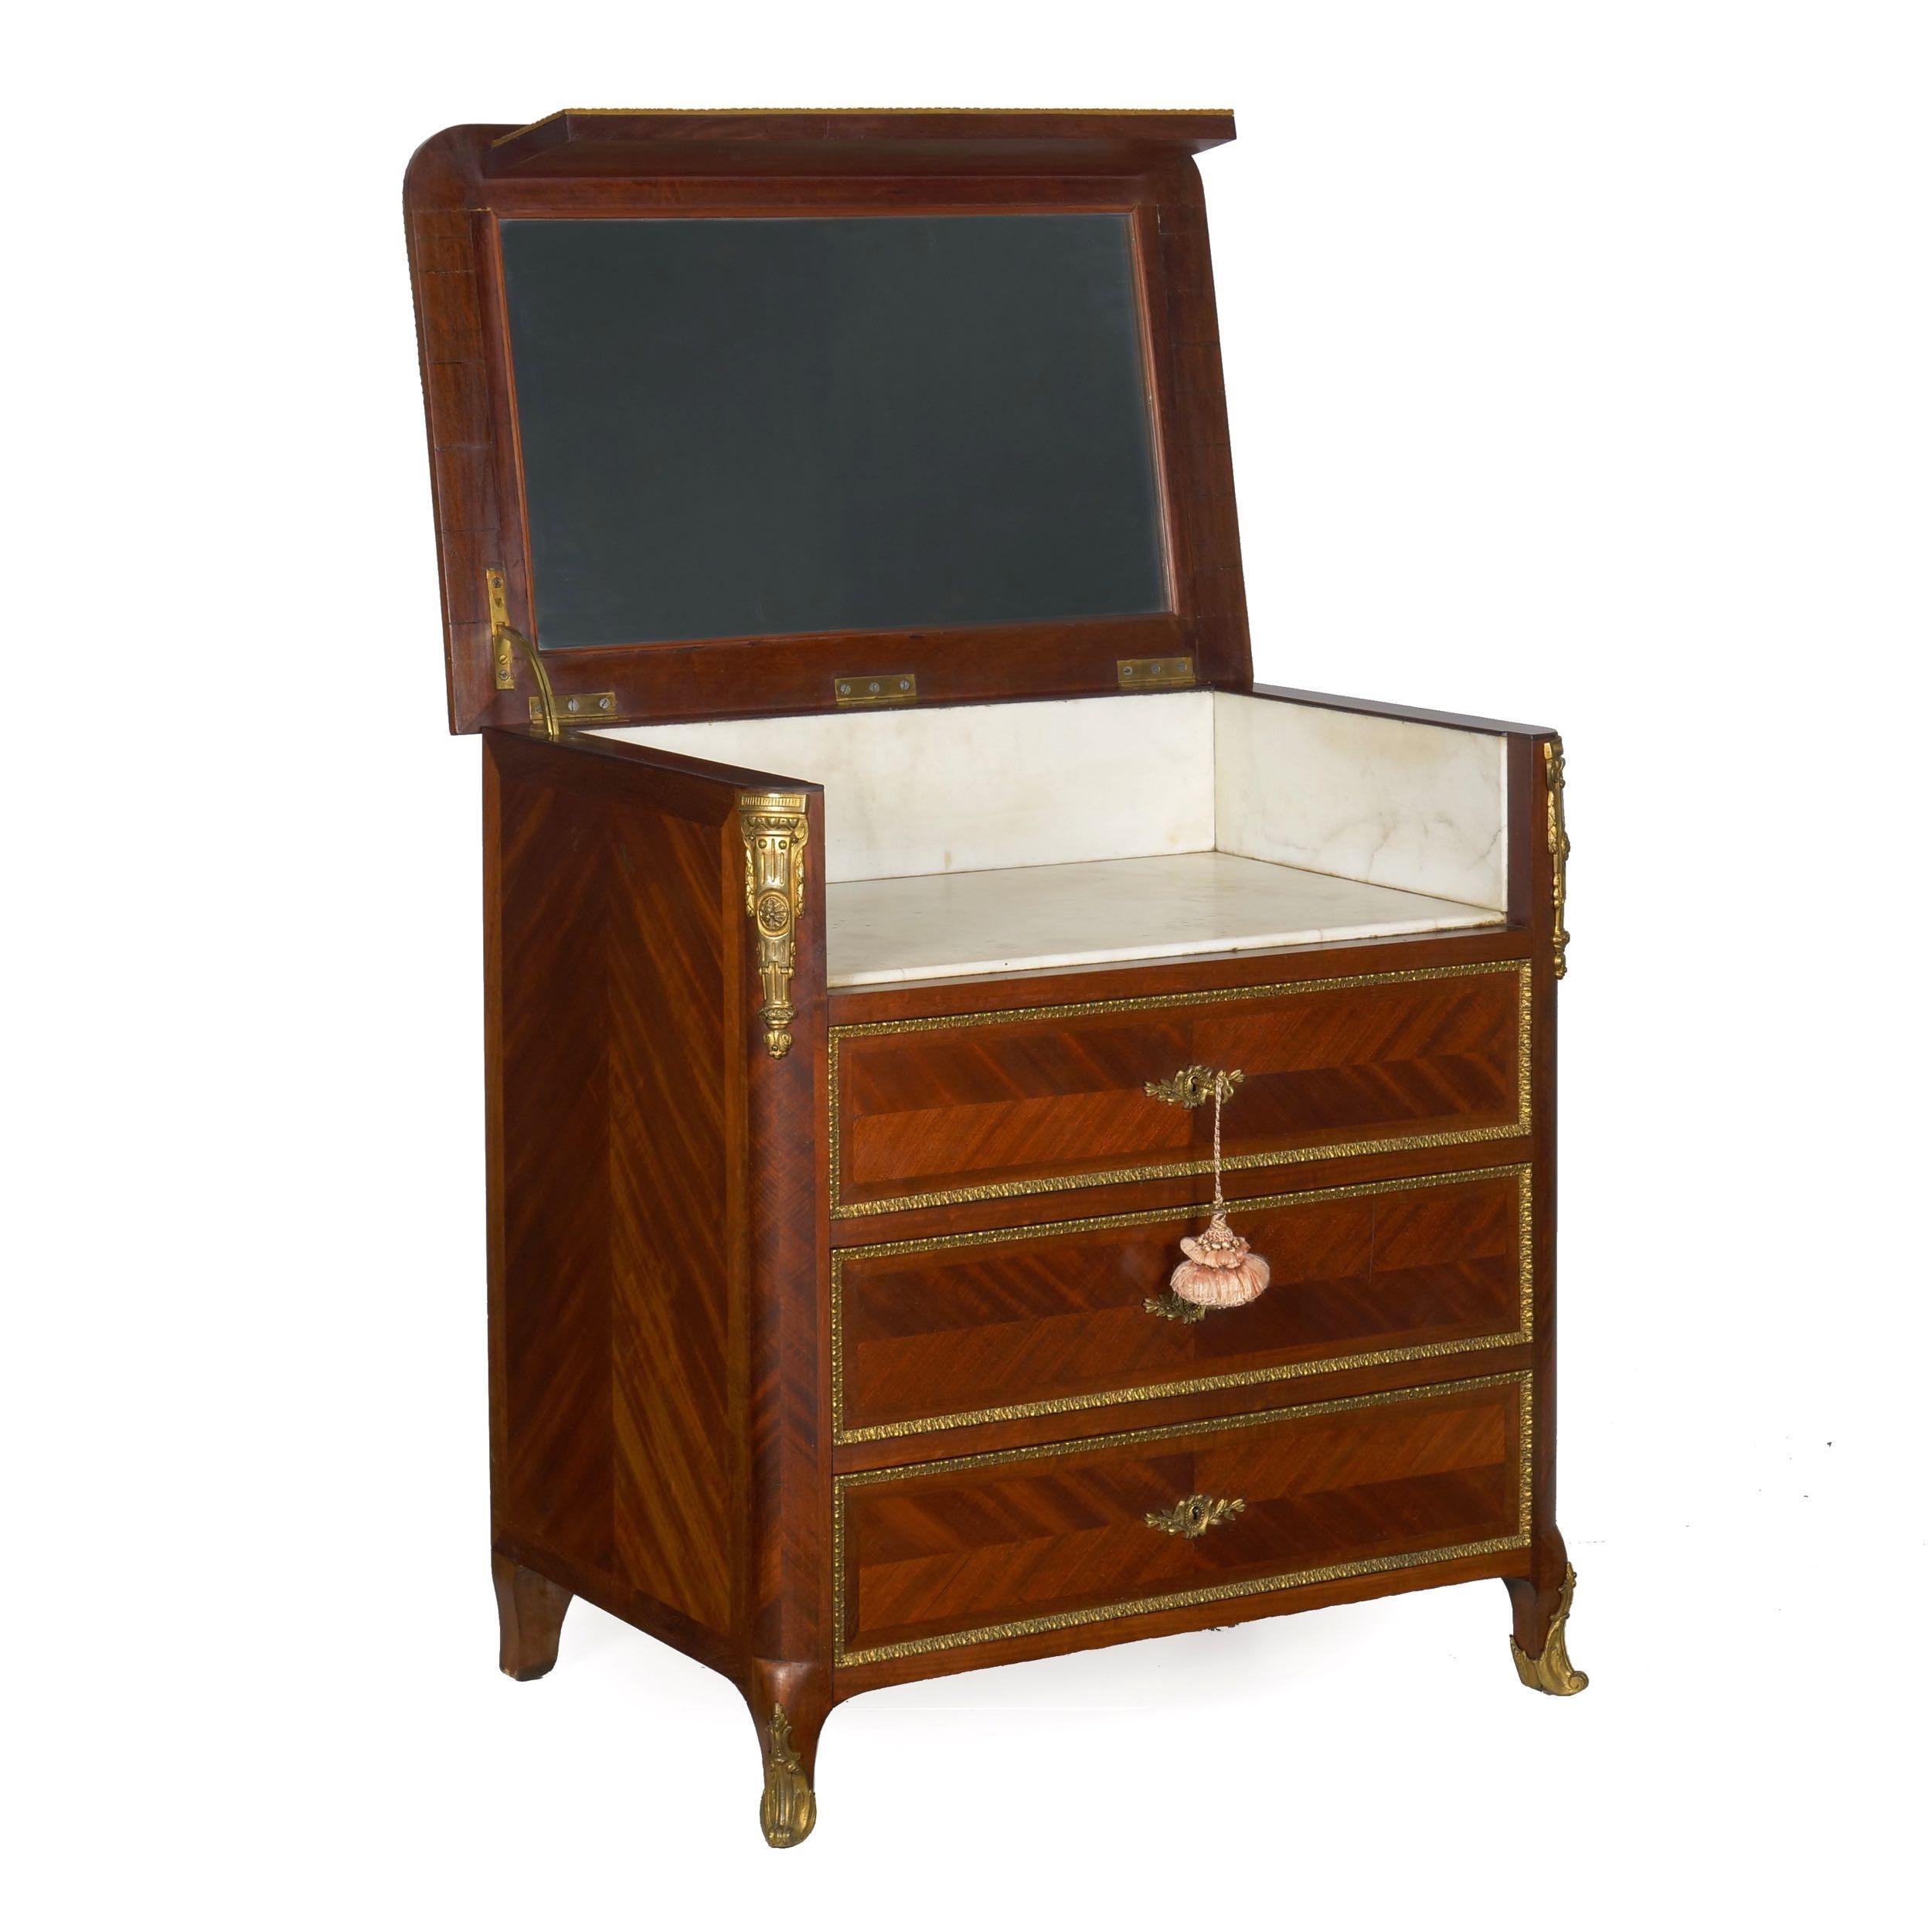 FRENCH ORMOLU MOUNTED PARQUETRY DRESSING COMMODE
With marble lined and mirrored interior, circa late 19th century
Item # 007EPG30

A refined little dressing commode in the Louis XV taste from the Belle Epoqué period, it presents as a chest of